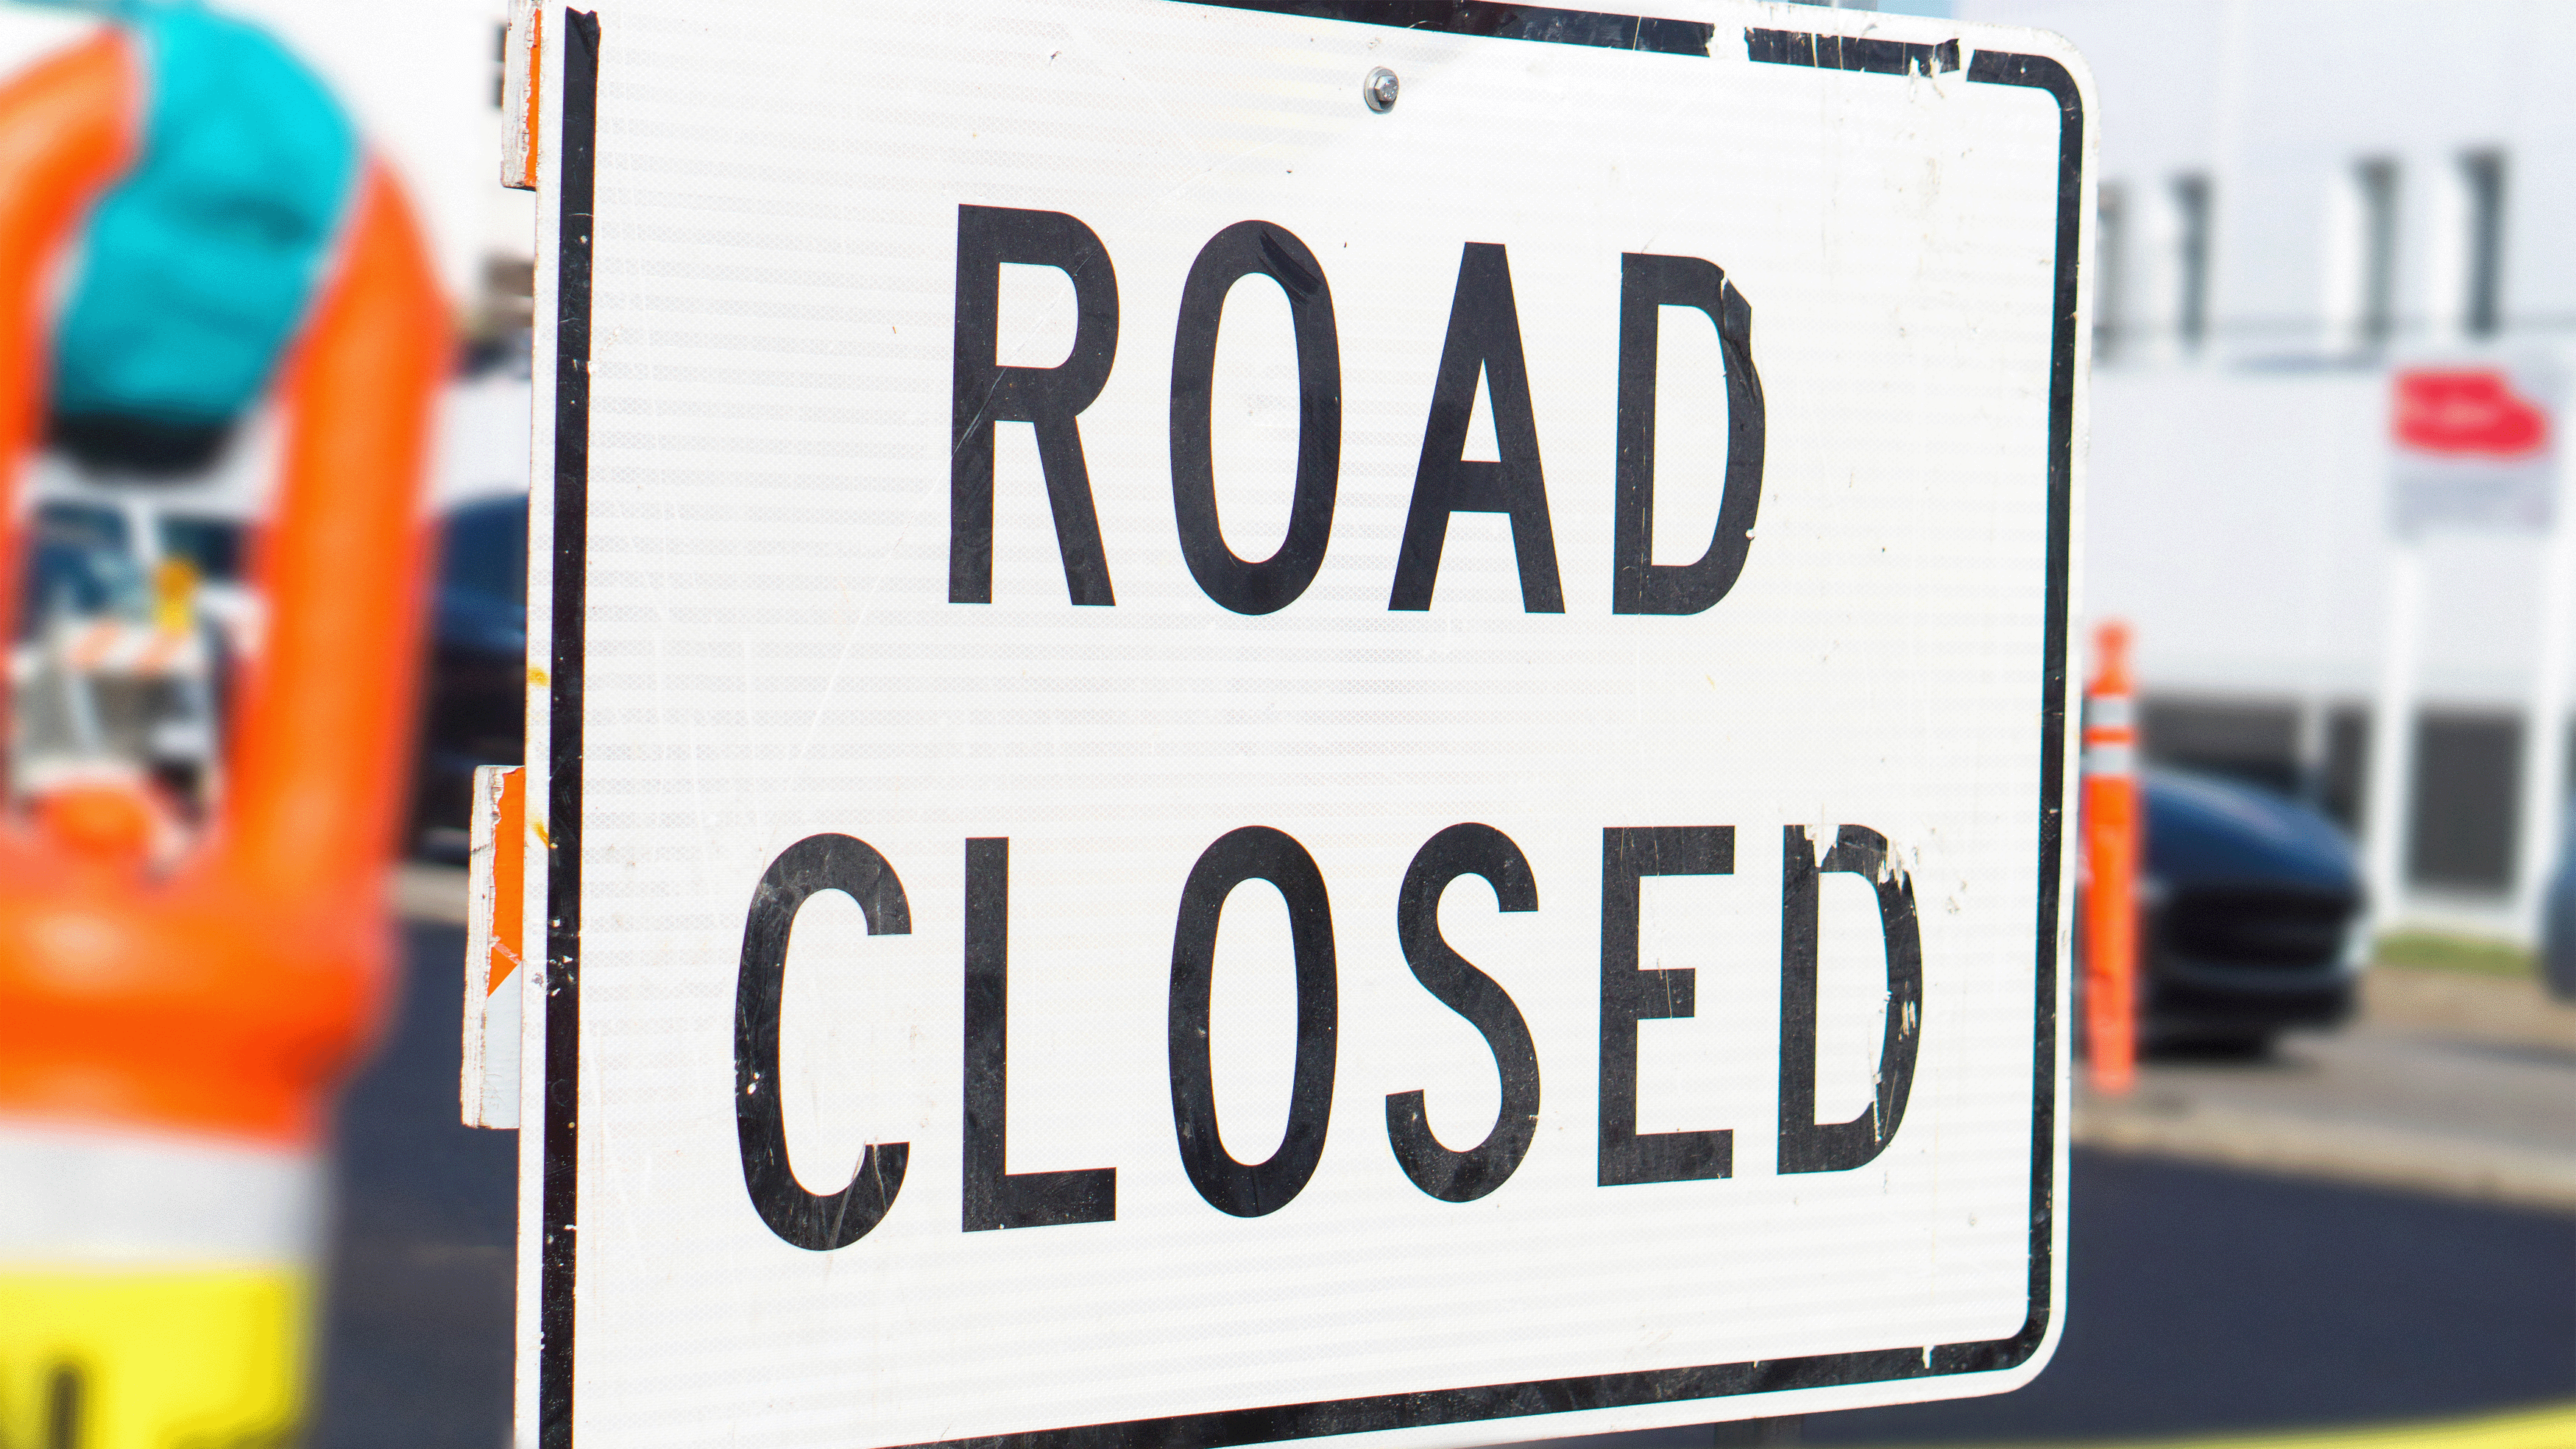 Closure planned for State Road 45 in Monroe County